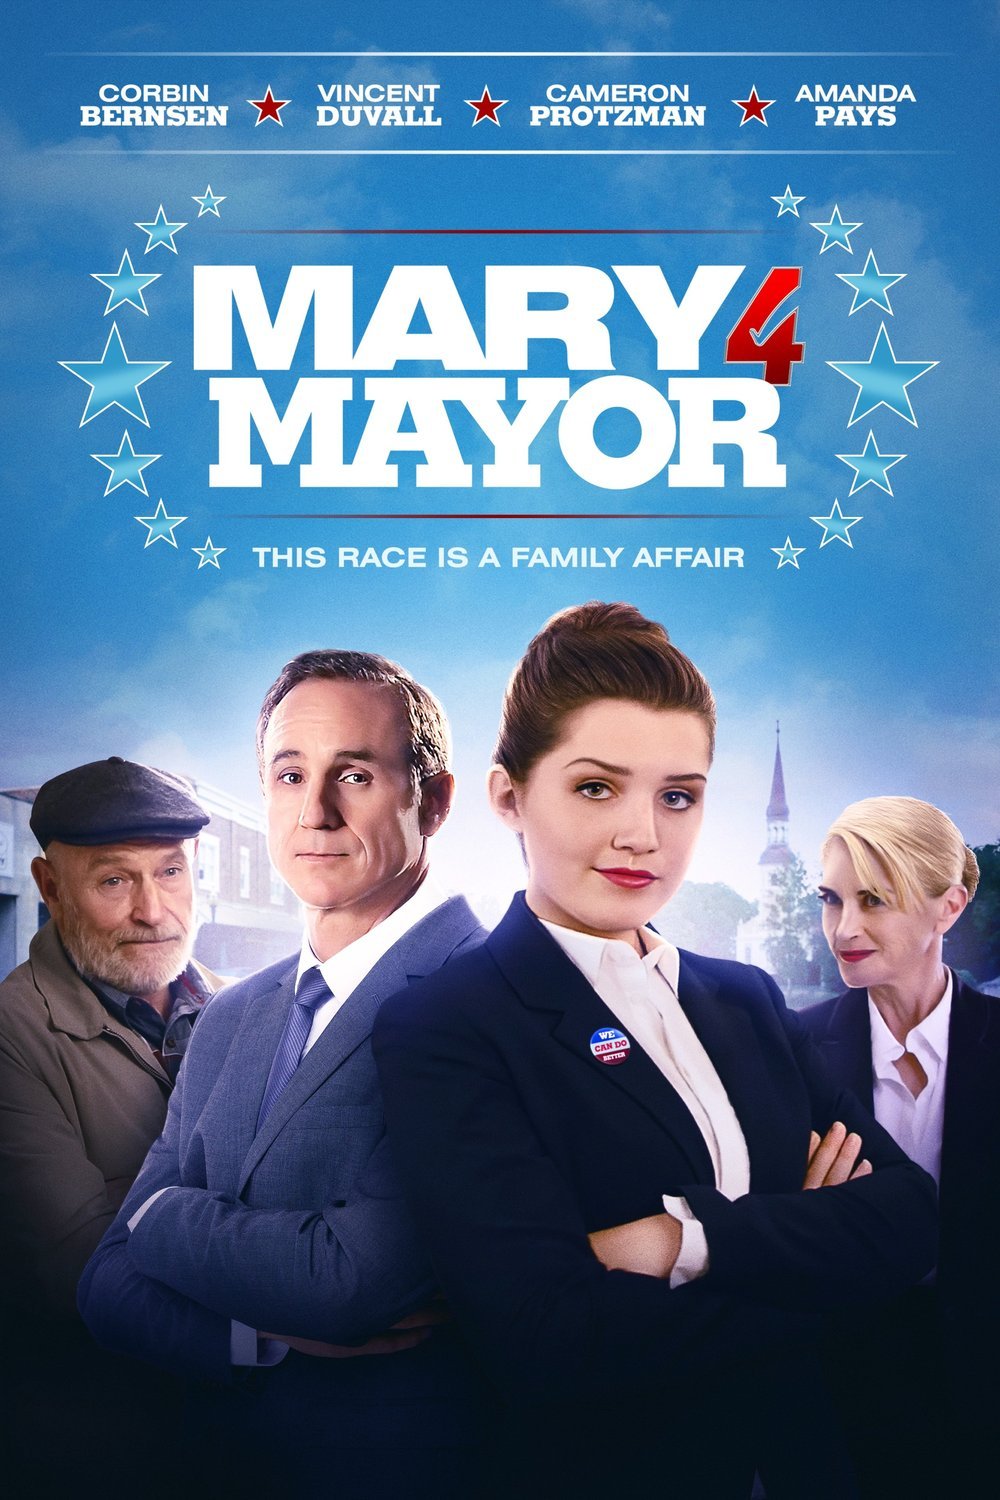 Poster of the movie Mary 4 Mayor